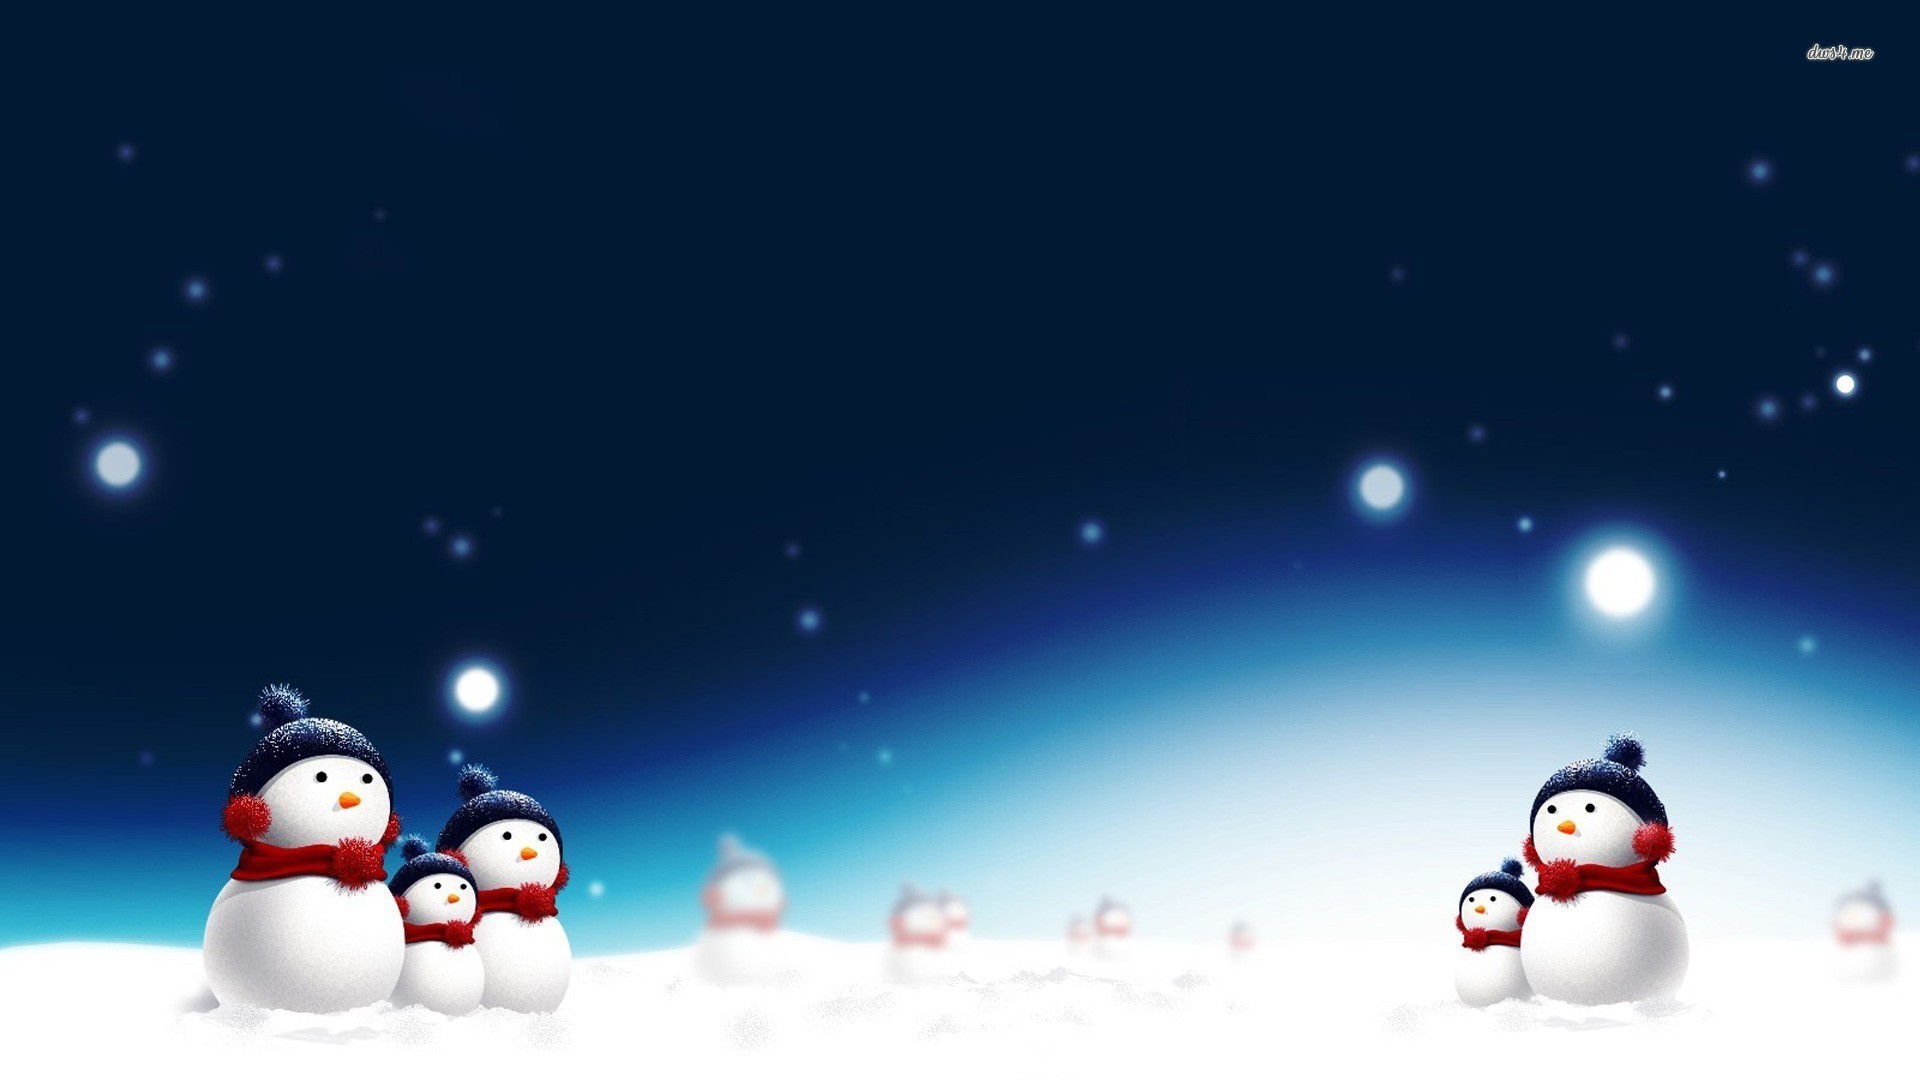 1920x1080 Free Holiday Wallpapers For Desktop